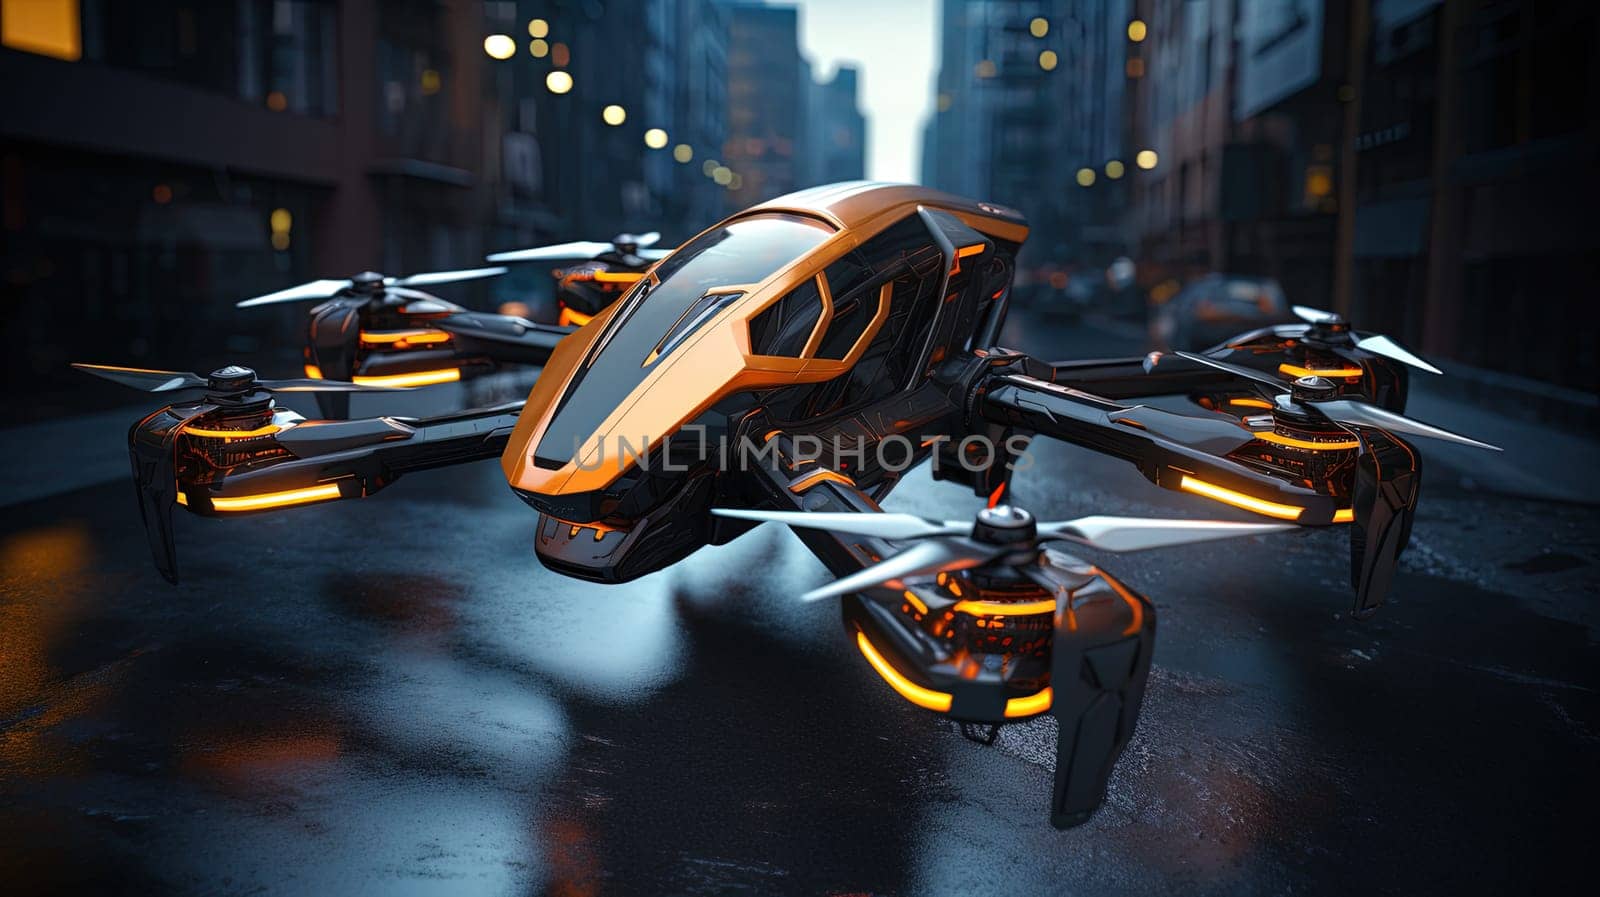 A close-up of a cyberpunk drone with angular edges and pulsating LED lights, its metallic shell adorned with circuit patterns by Kadula